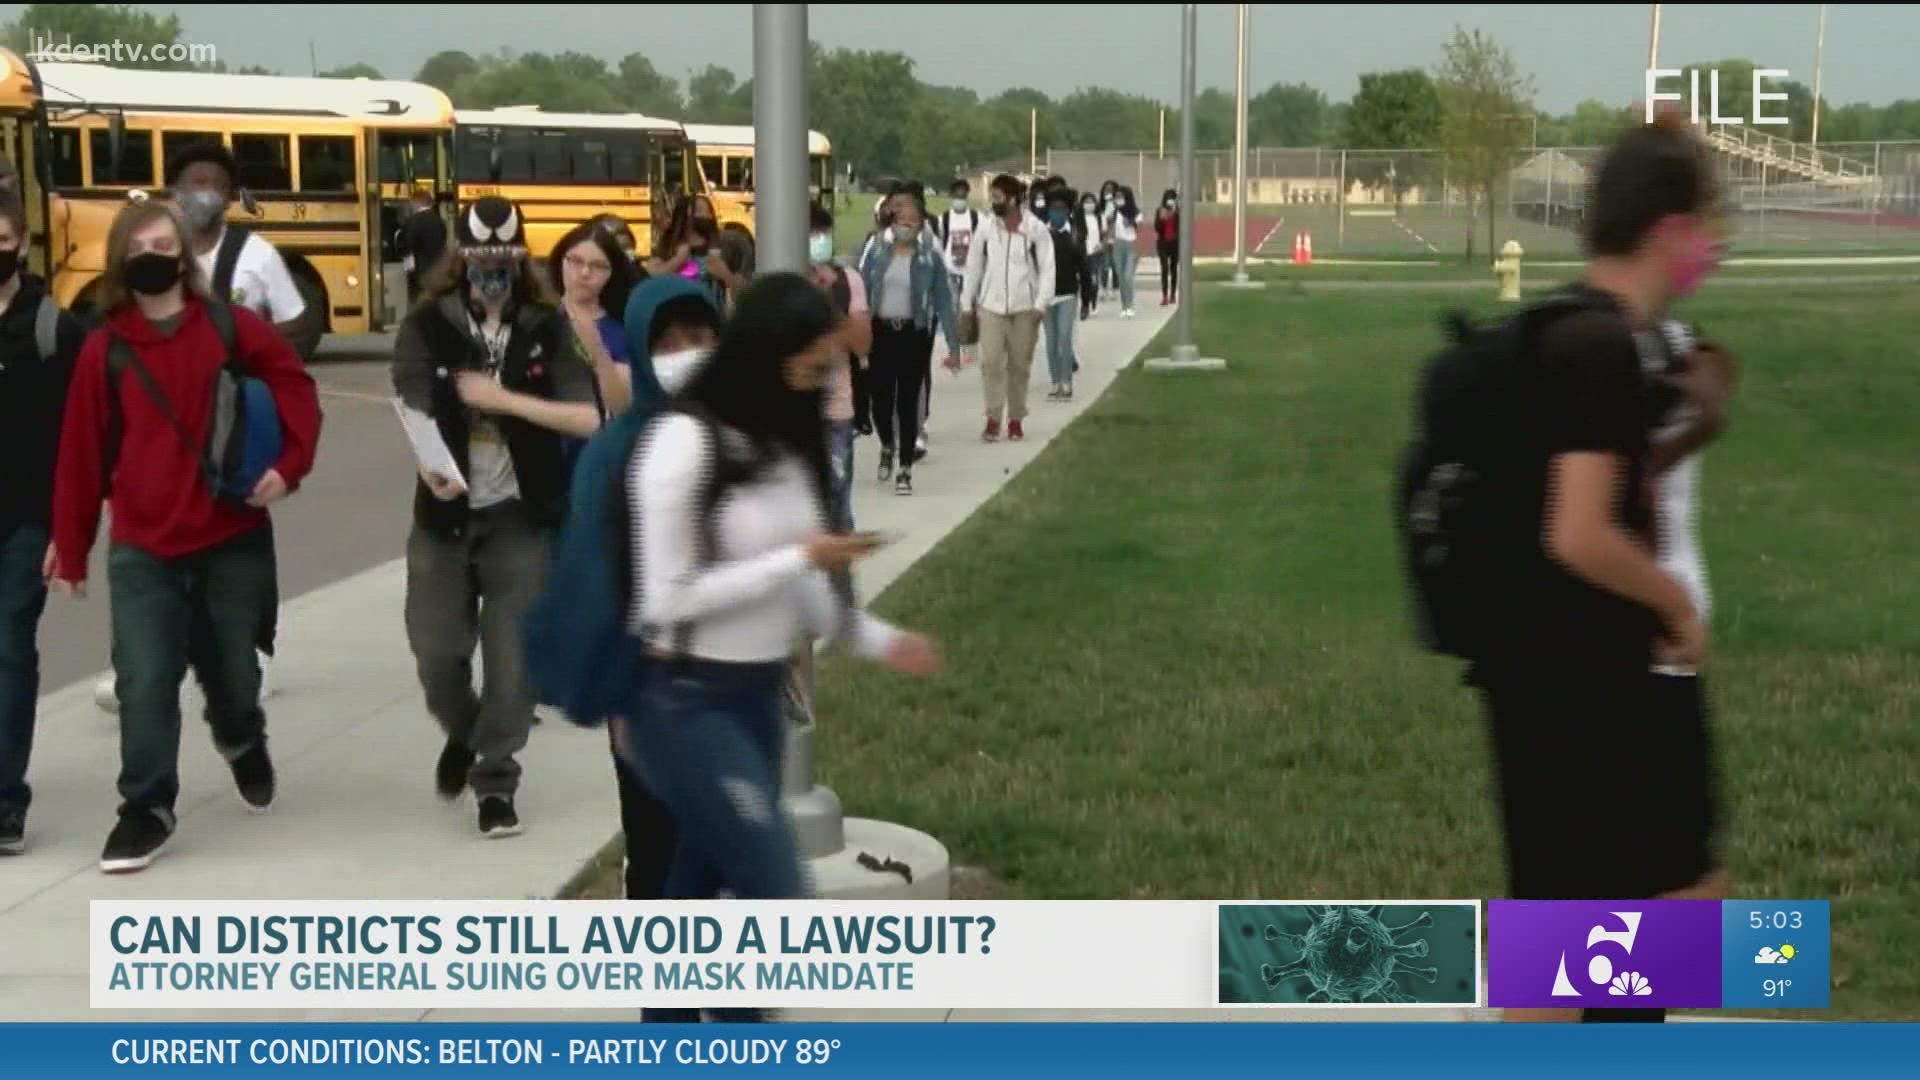 6 News spoke directly with AG Ken Paxton about what schools can do to avoid heading to court.